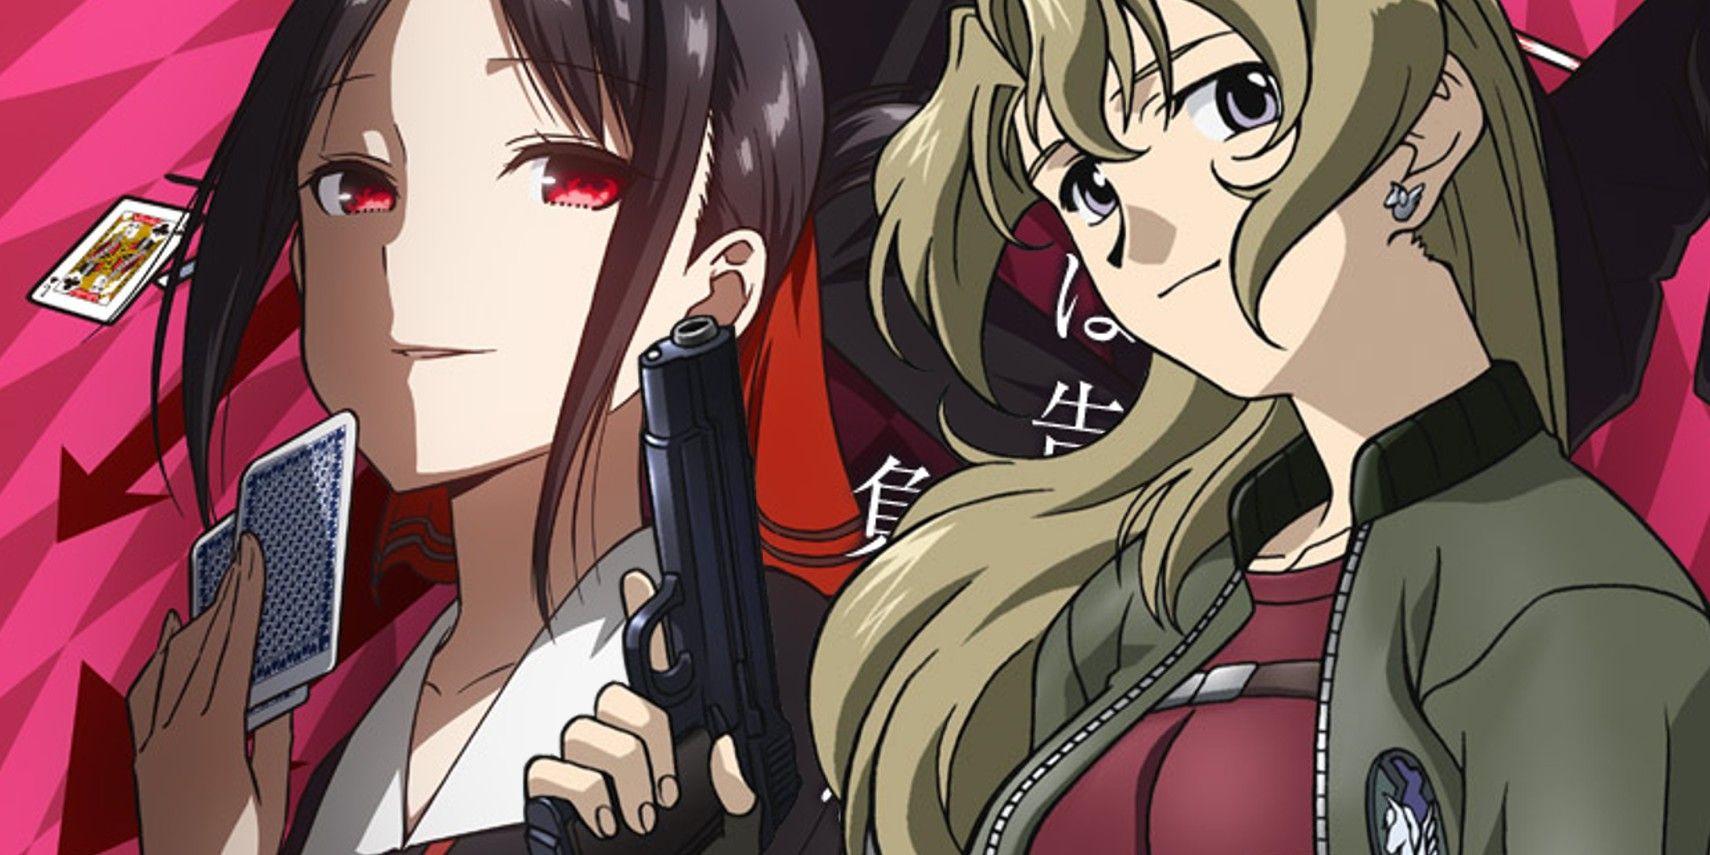 Kaguya plans her next move while Madlax stays calm